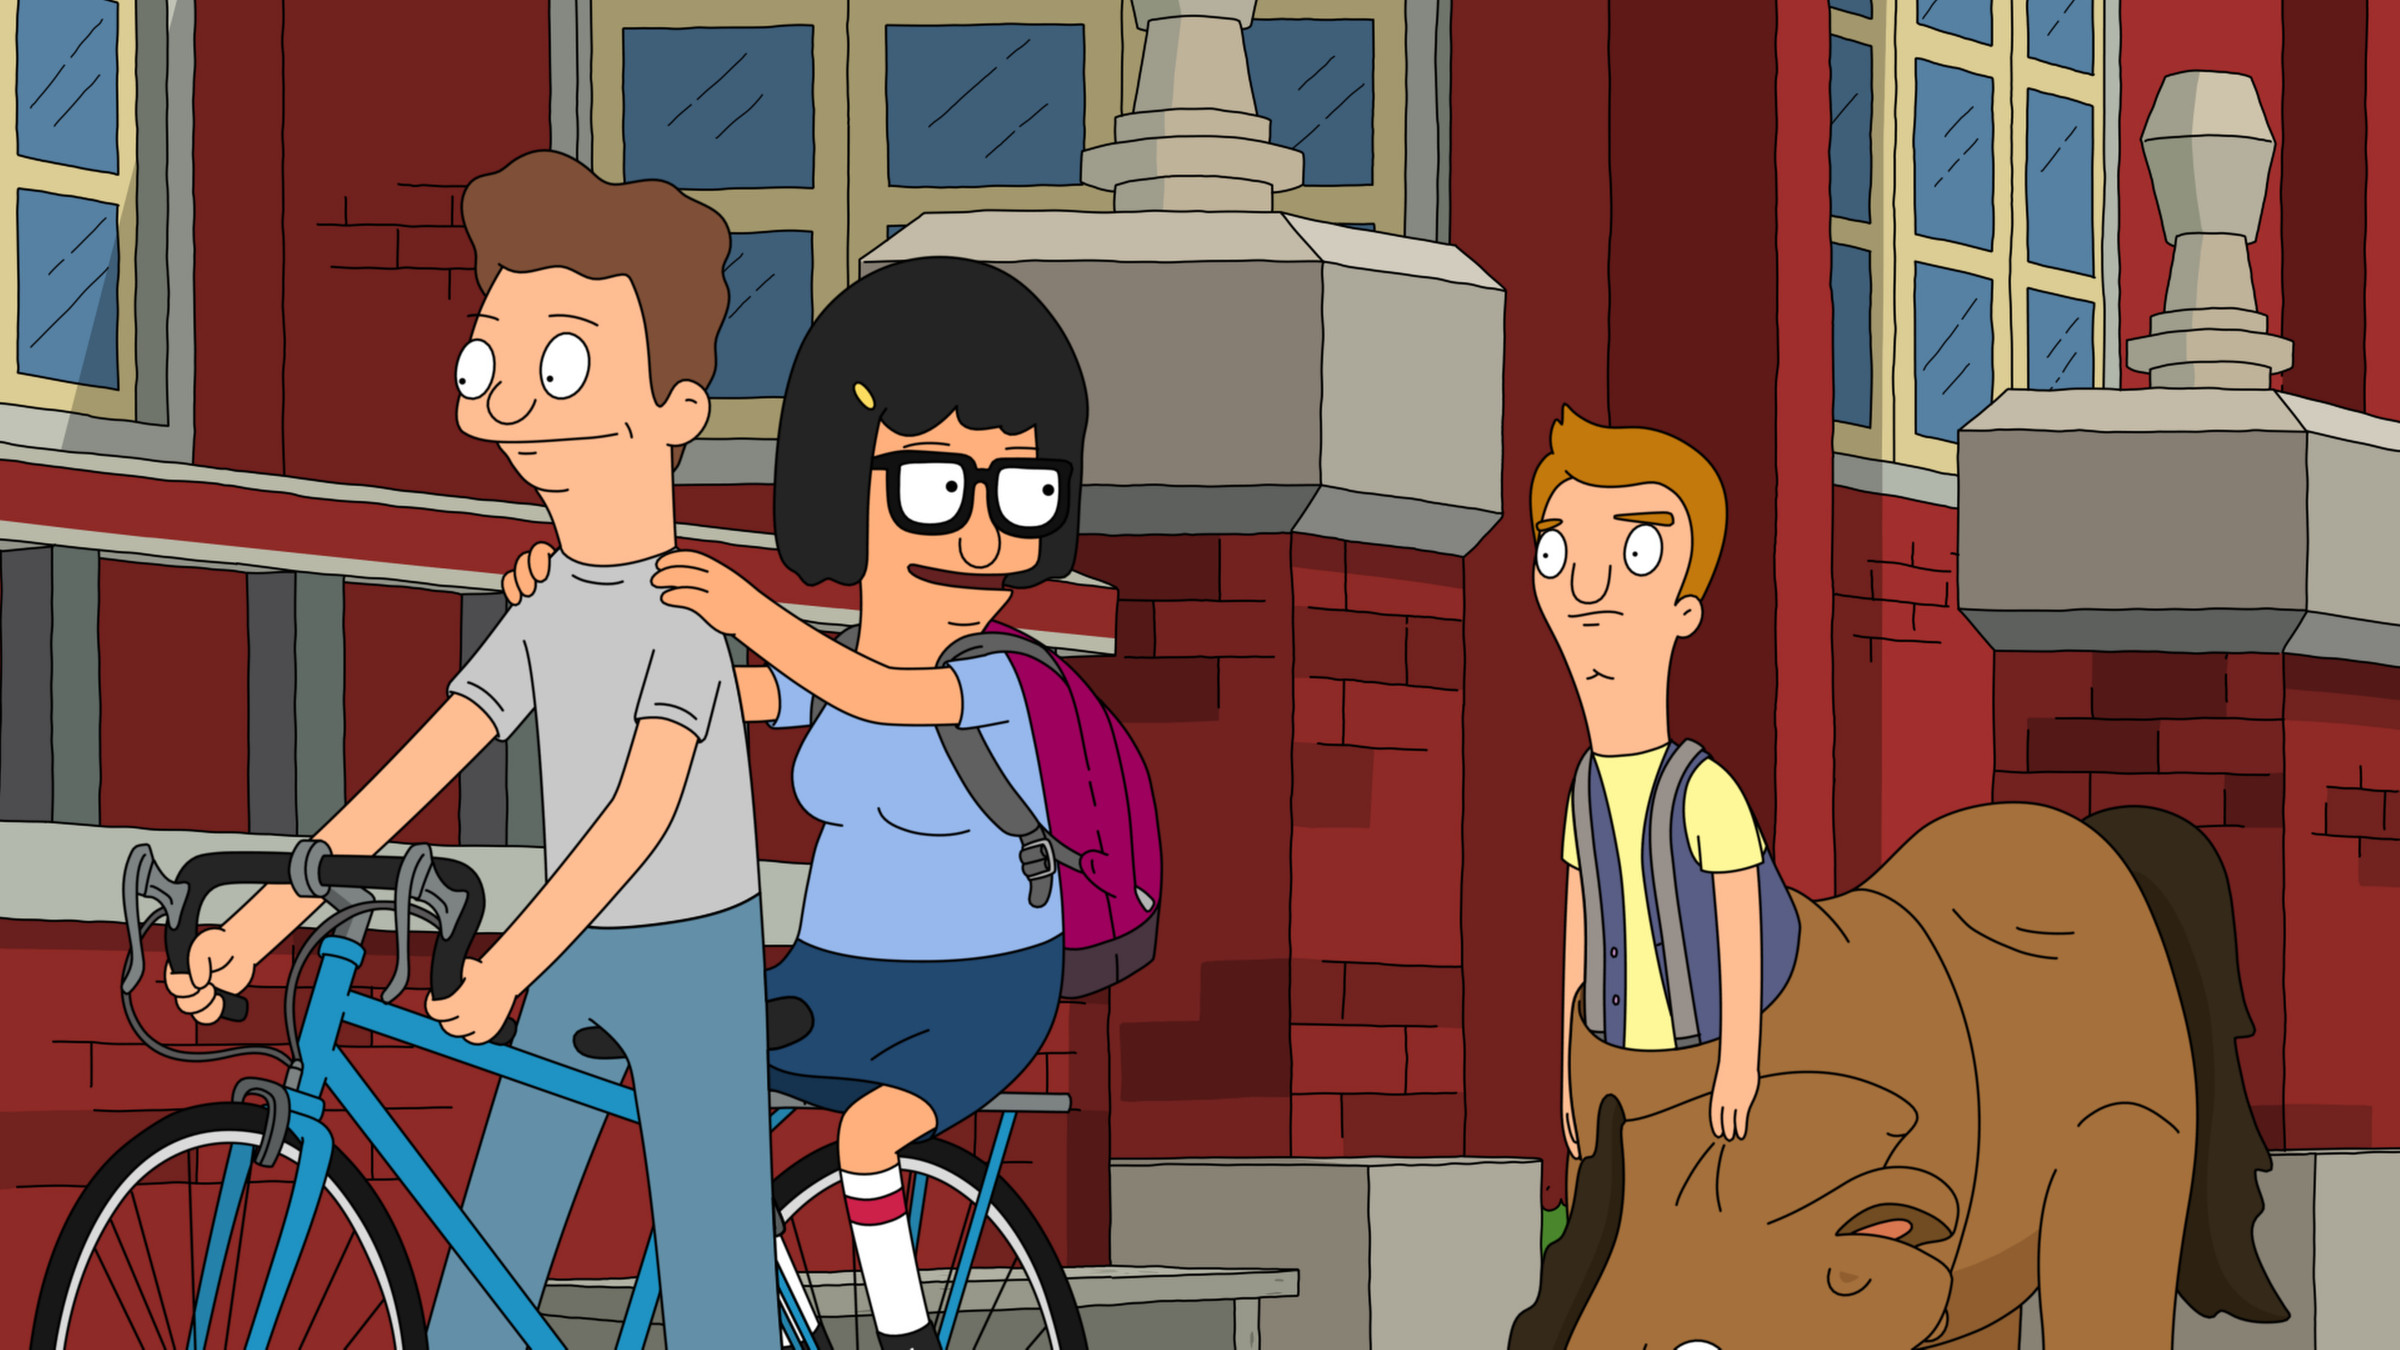 2400x1350 Bob's Burgers Wallpaper. by MIGRANE0Aug 15 2015. Load 26 more images Grid  view